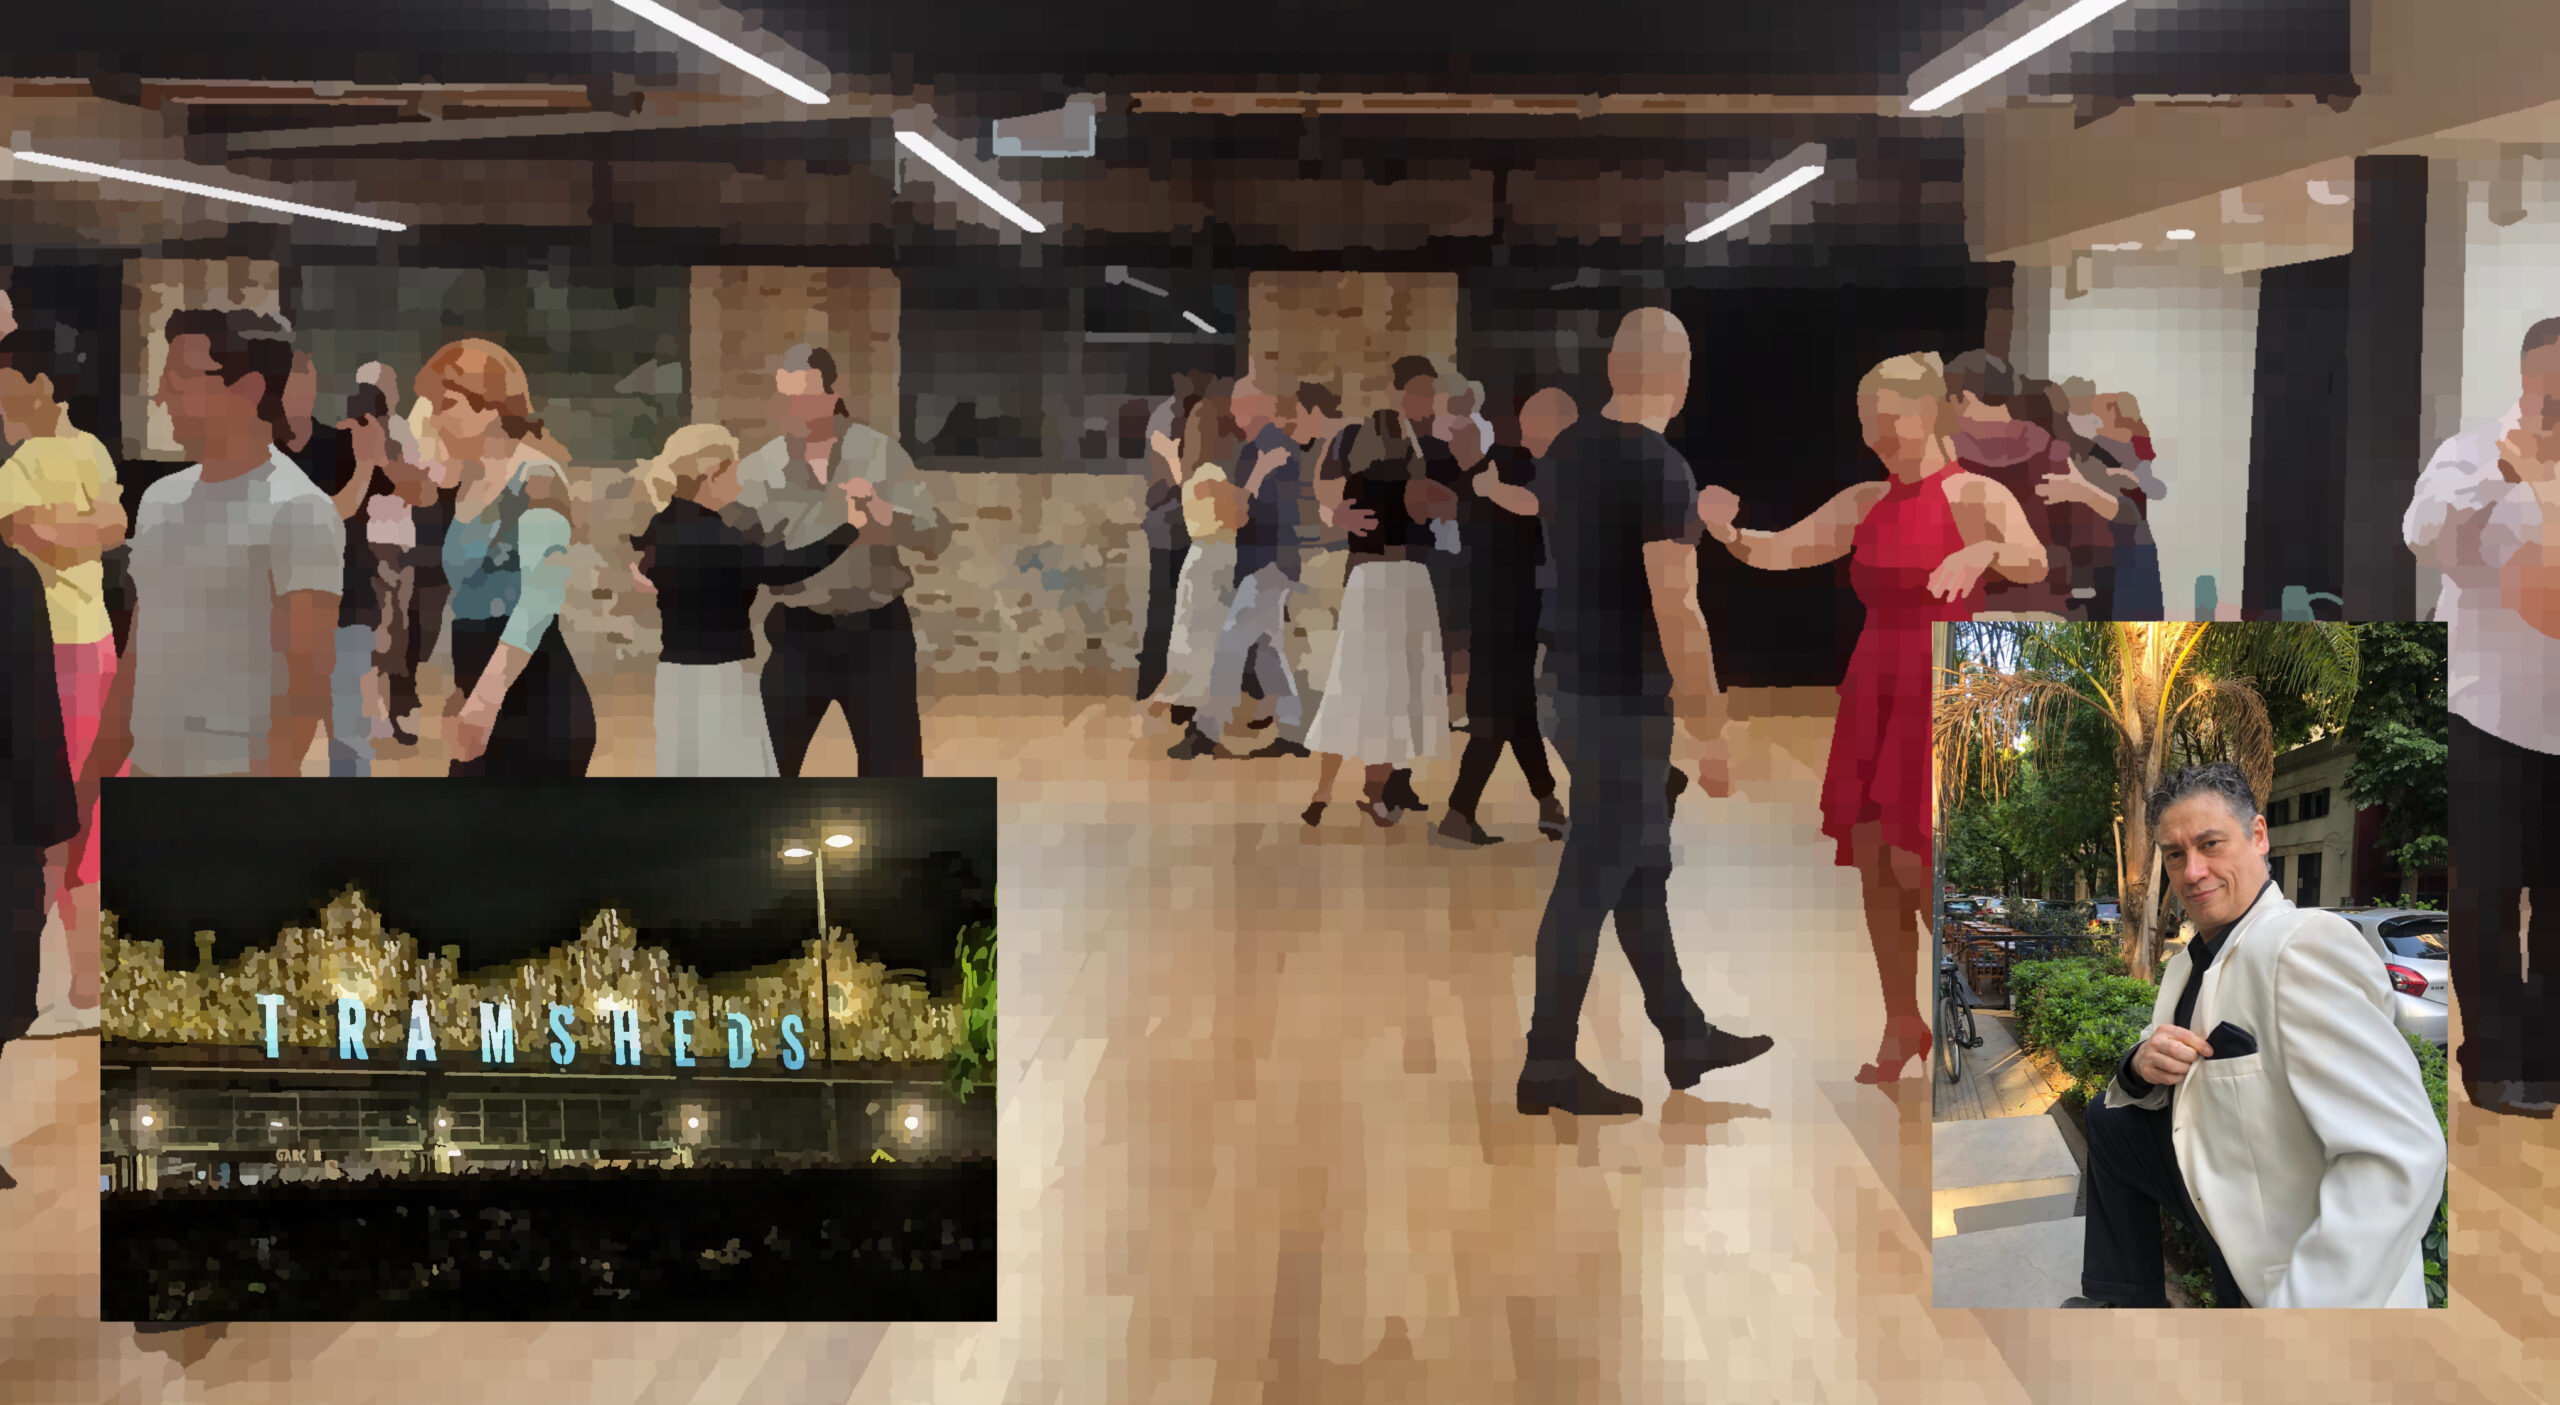 composite image of tramsheds venue and beto barsellini